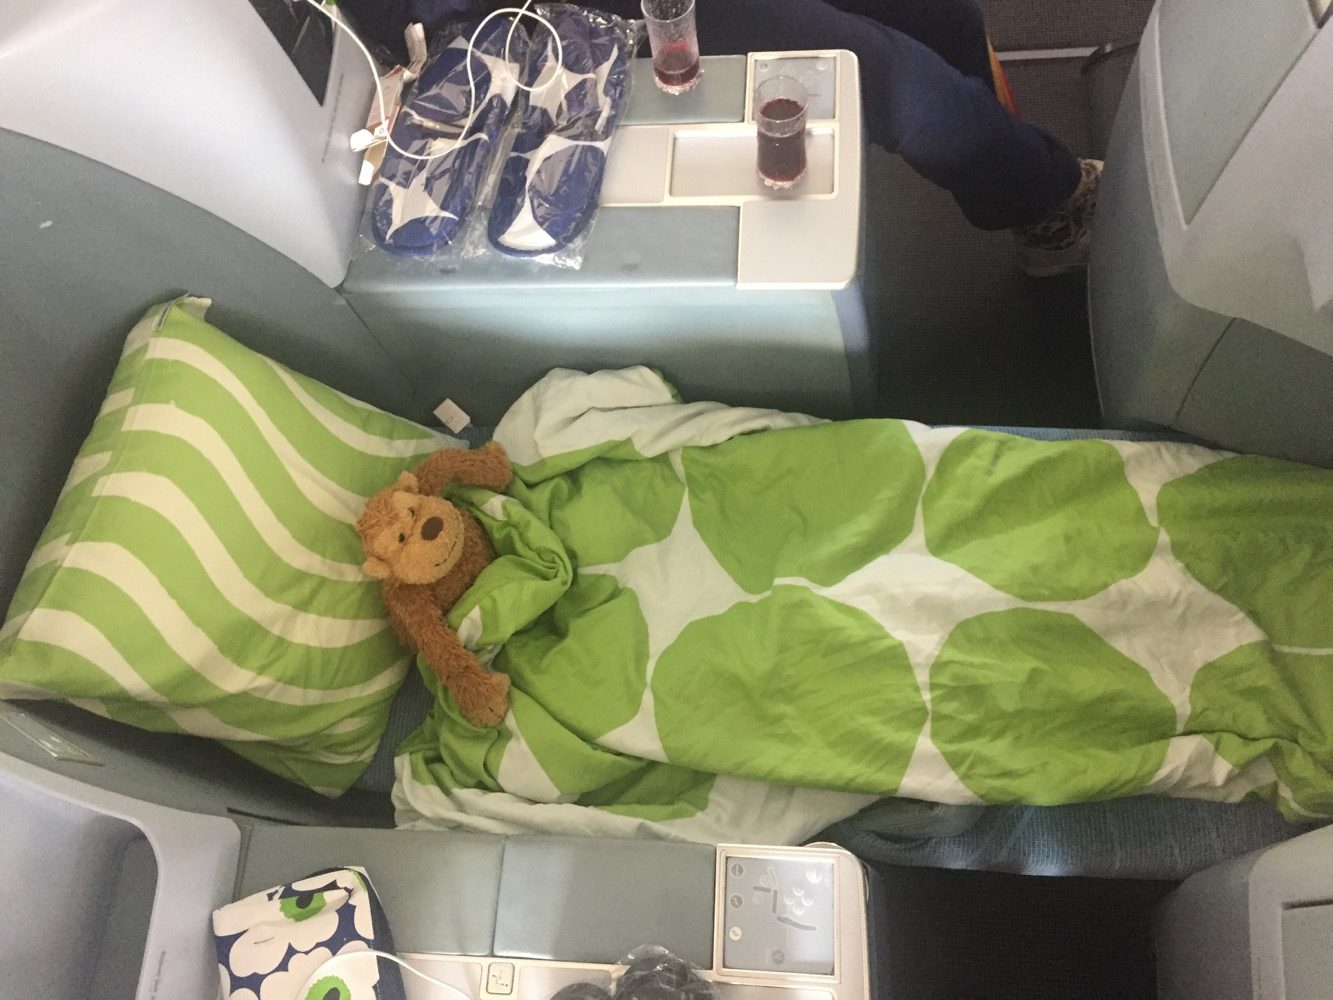 a teddy bear wrapped in a blanket on a plane